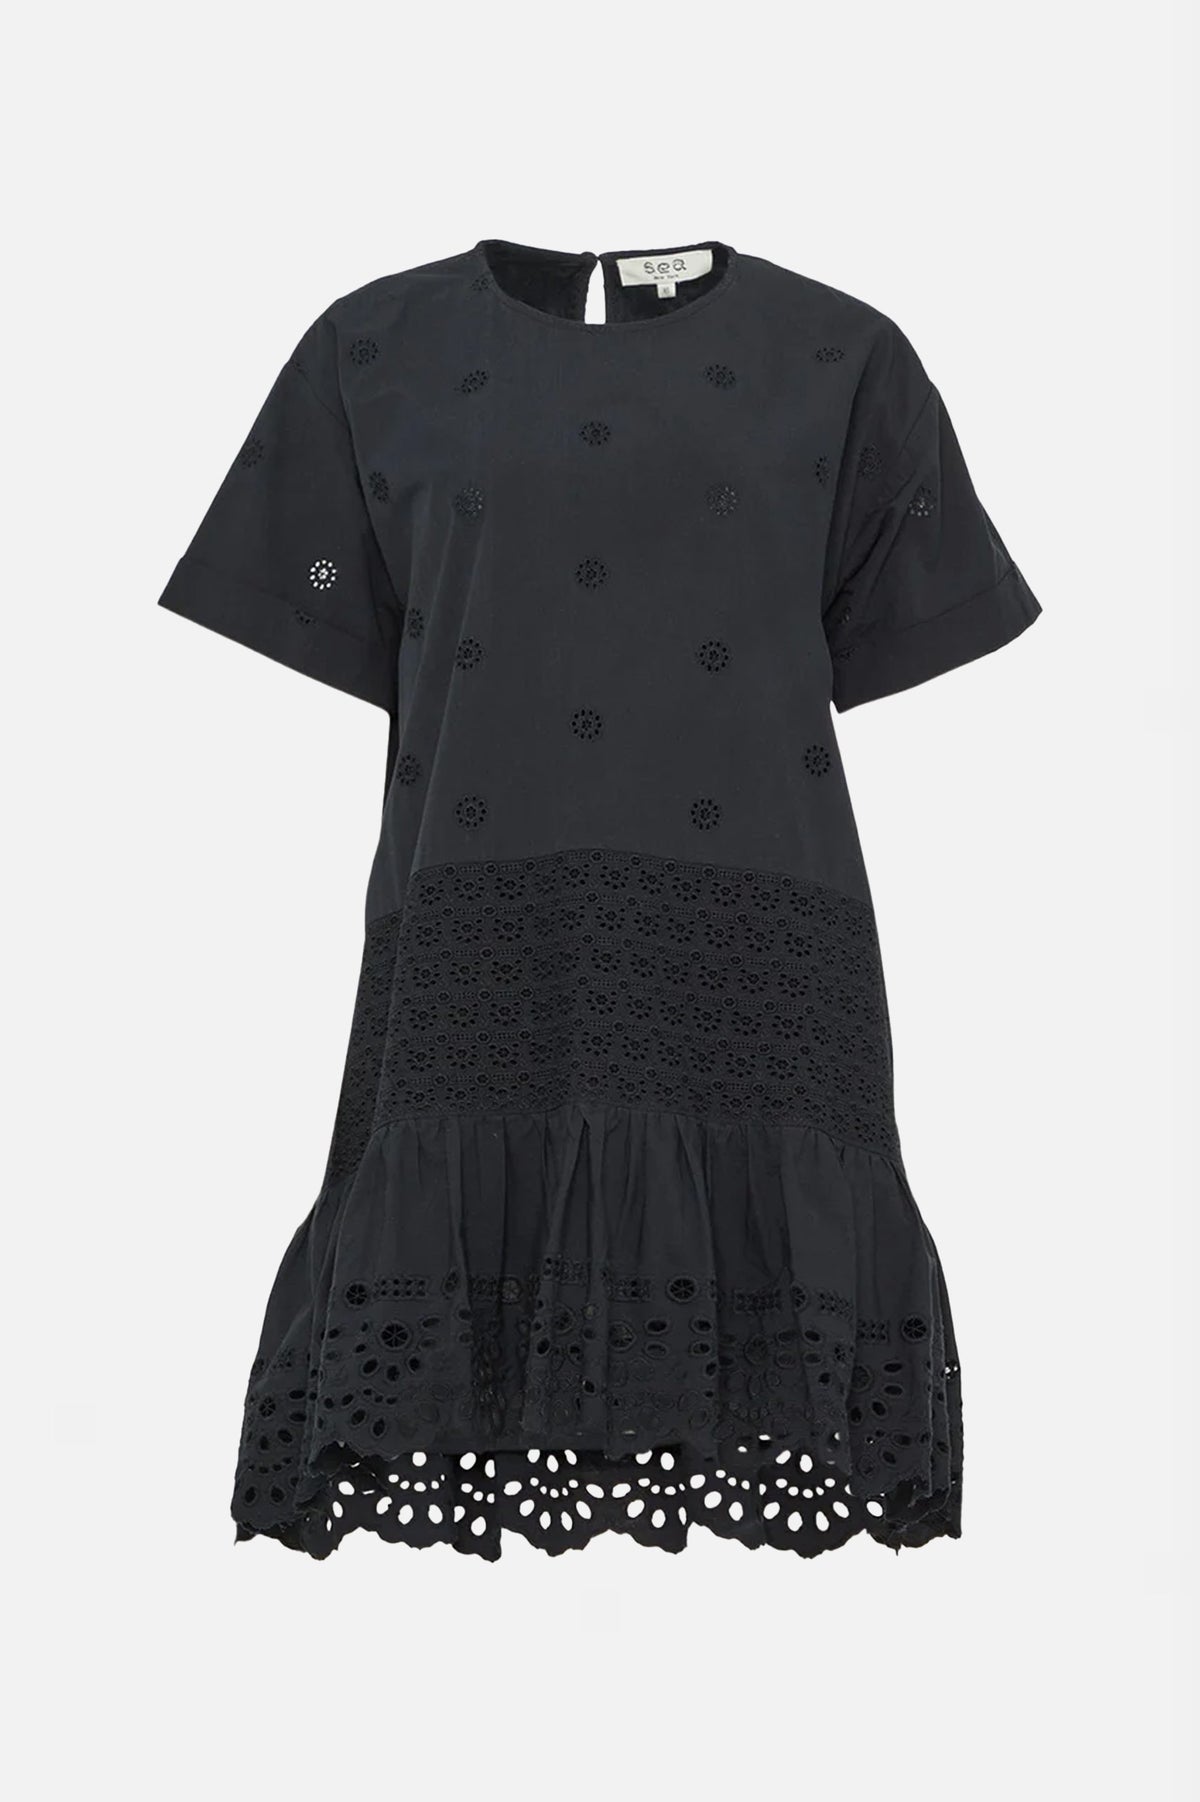 Elysse Embroidered Tunic Dress in Black